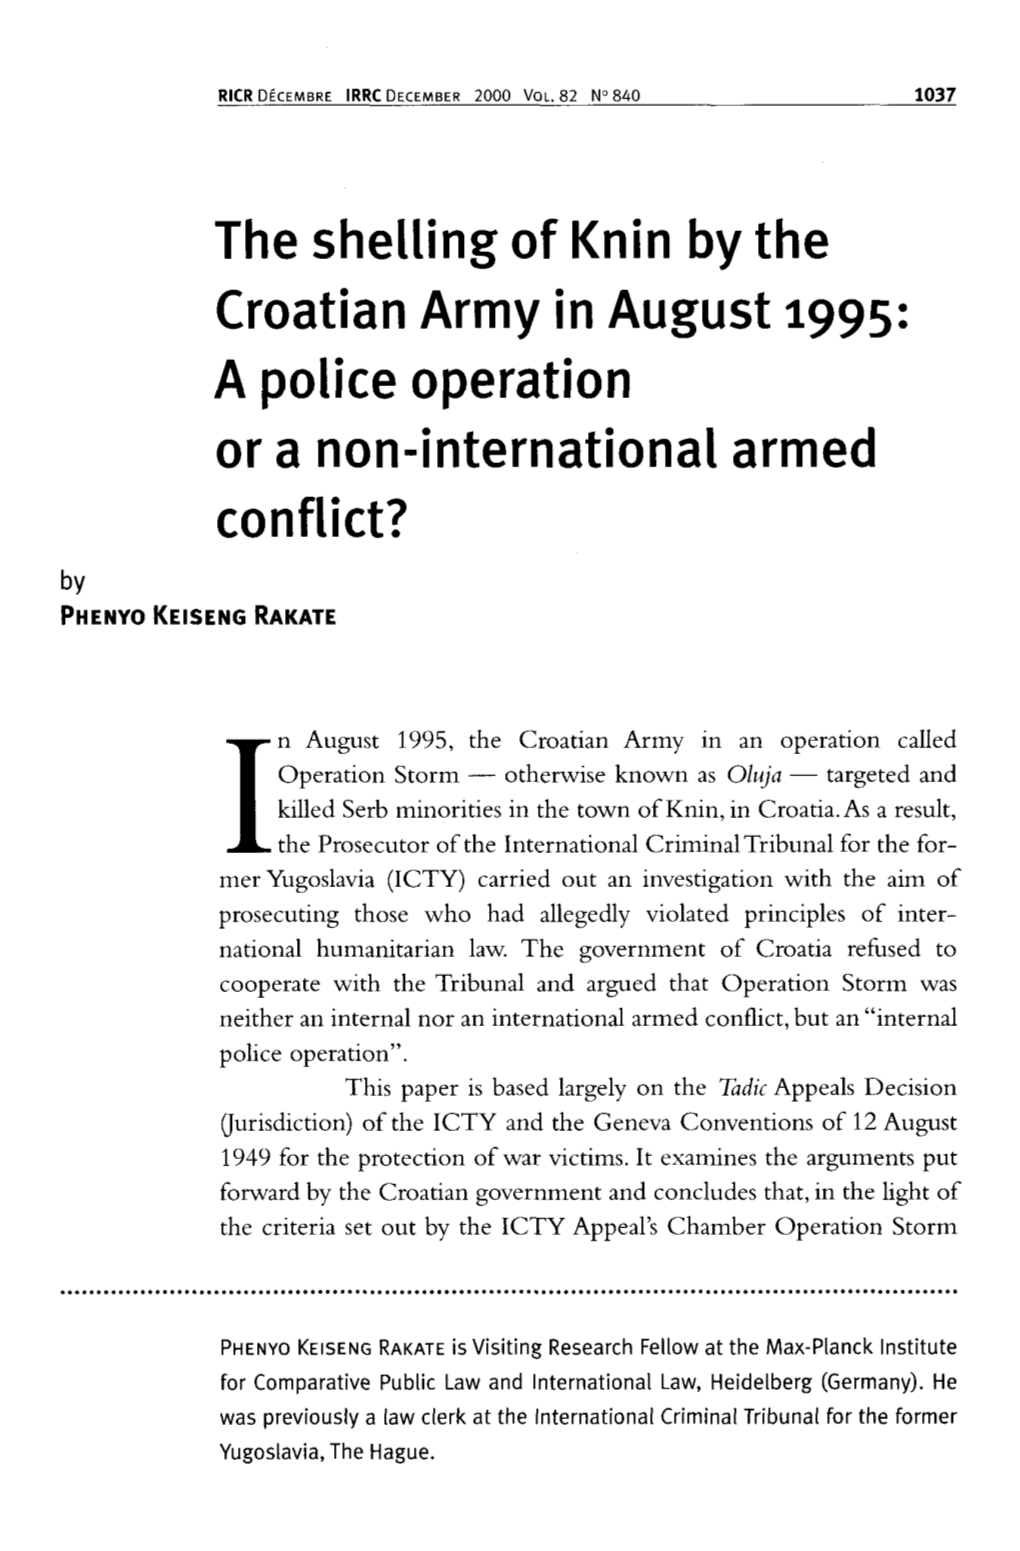 The Shelling of Knin by the Croatian Army in August 1995: a Police Operation Or a Non-International Armed Conflict? by PHENYO KEISENG RAKATE